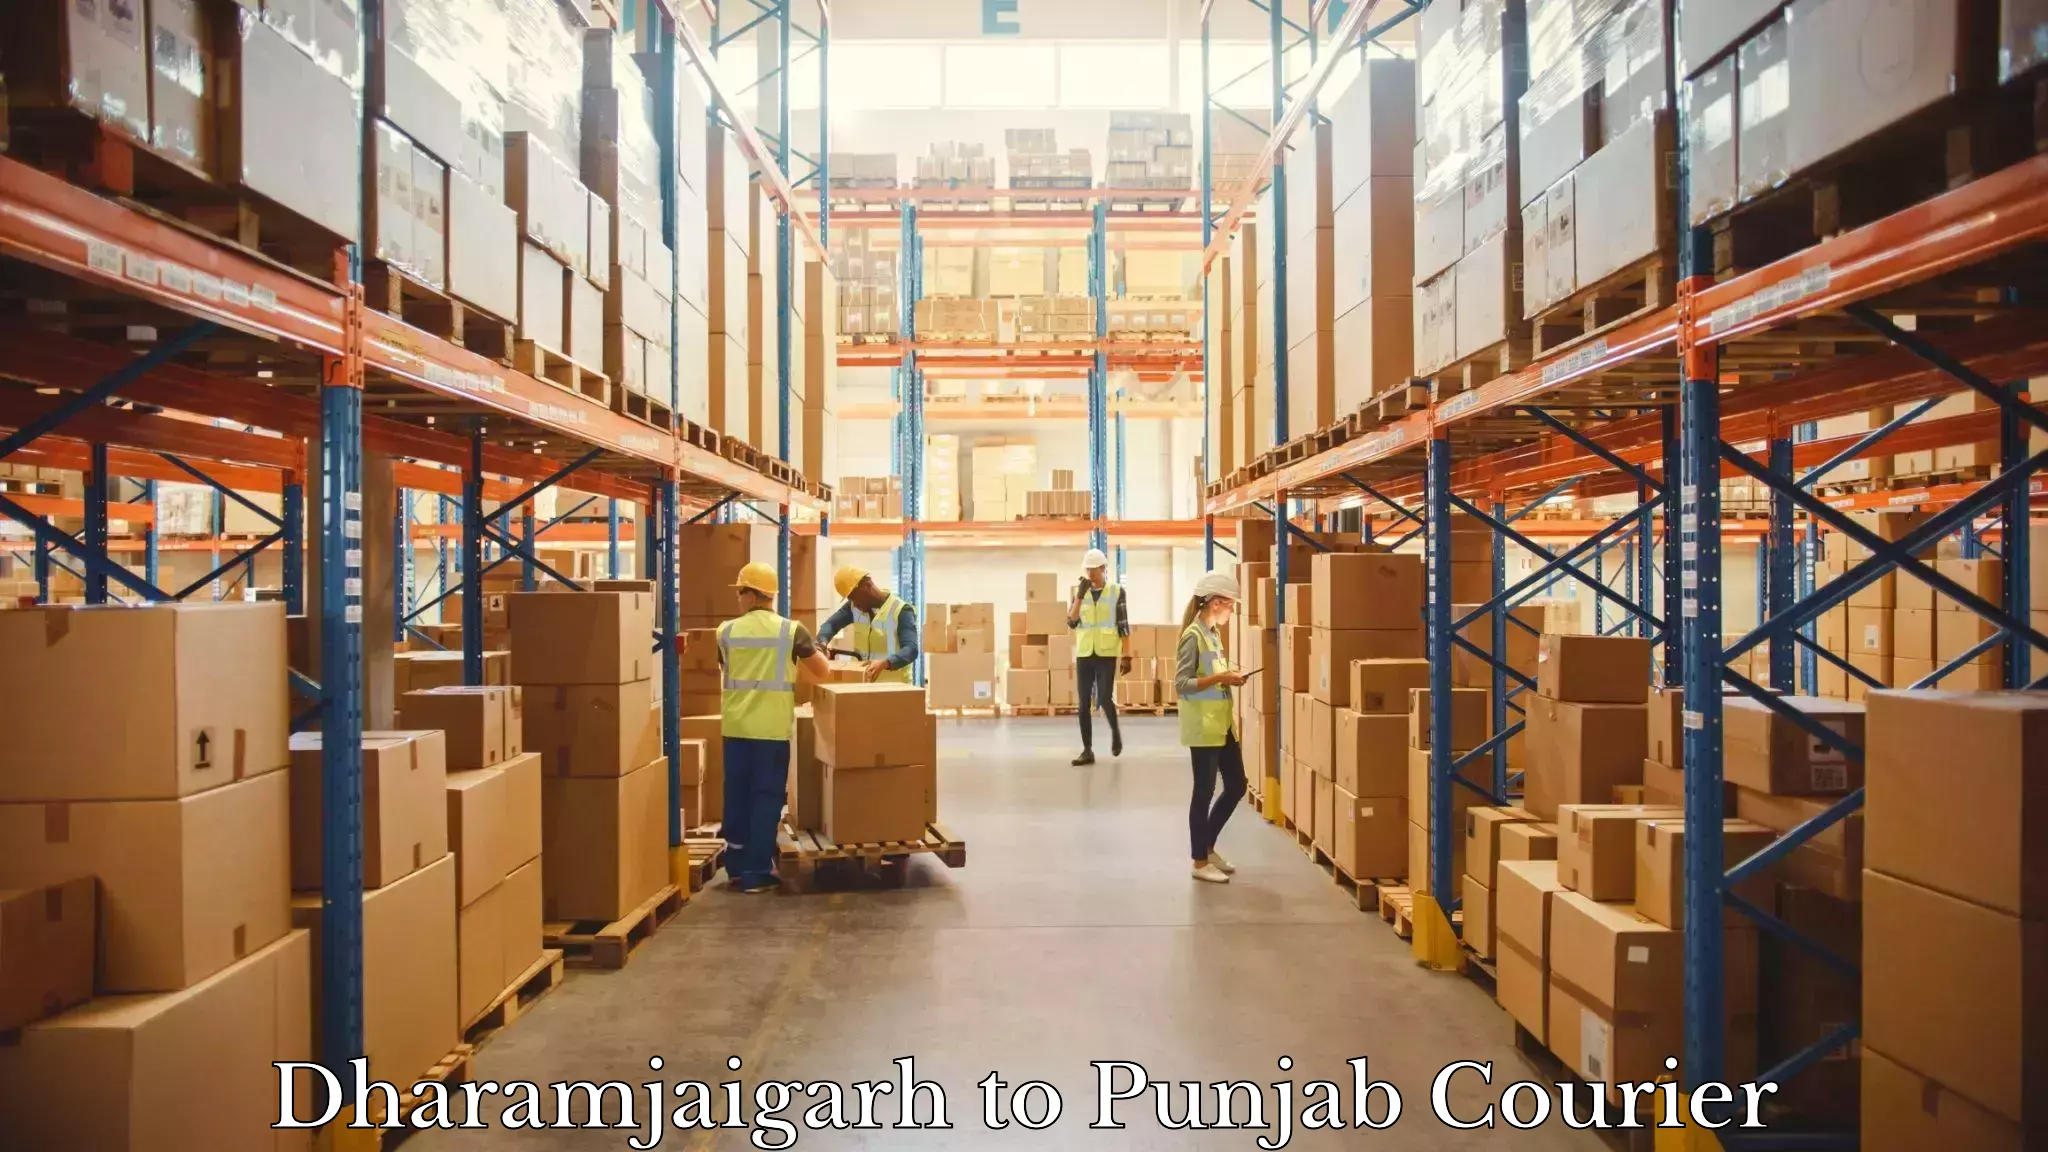 International courier networks Dharamjaigarh to Central University of Punjab Bathinda